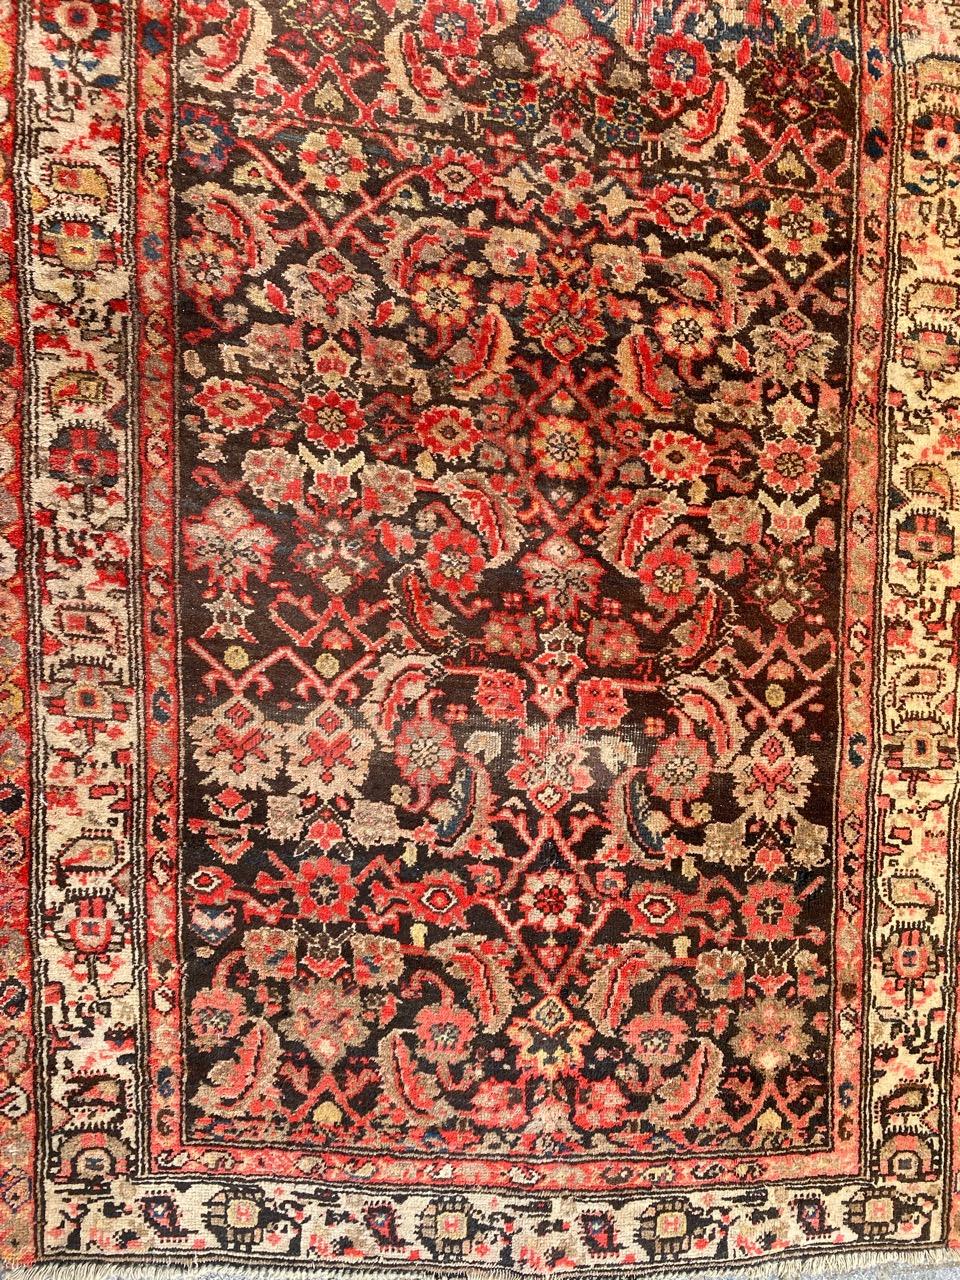 Very nice antique long Bijar hallway rug, with pretty Herati designs, and pretty natural colors with a background of dark brown, red, blue and yellow, entirely hand-knotted in wool velvet on a cotton foundation.